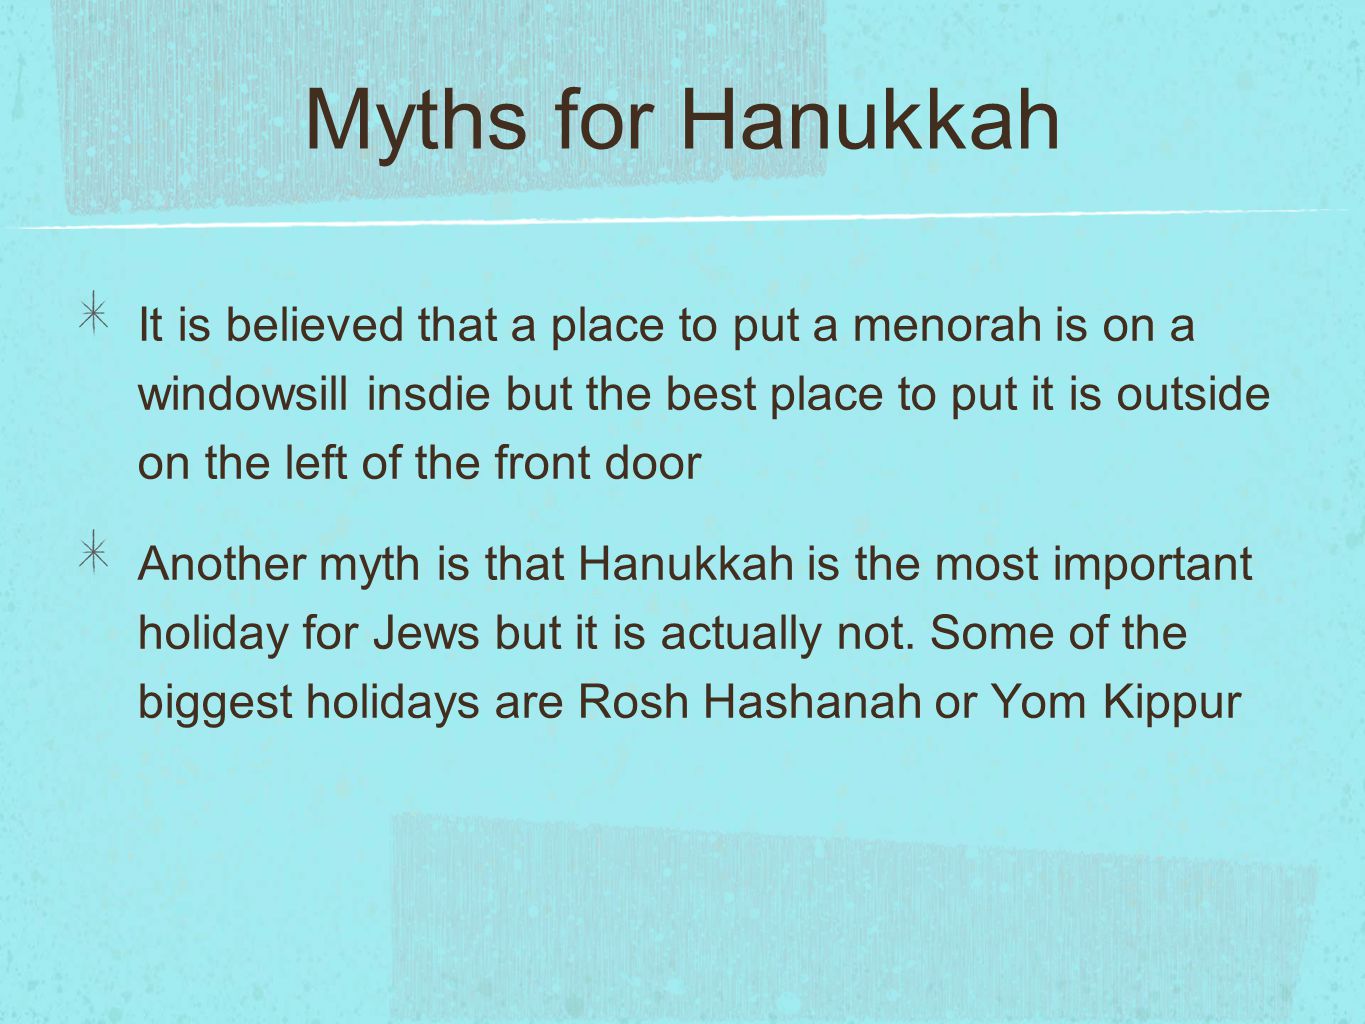 Myths for Hanukkah It is believed that a place to put a menorah is on a windowsill insdie but the best place to put it is outside on the left of the front door Another myth is that Hanukkah is the most important holiday for Jews but it is actually not.